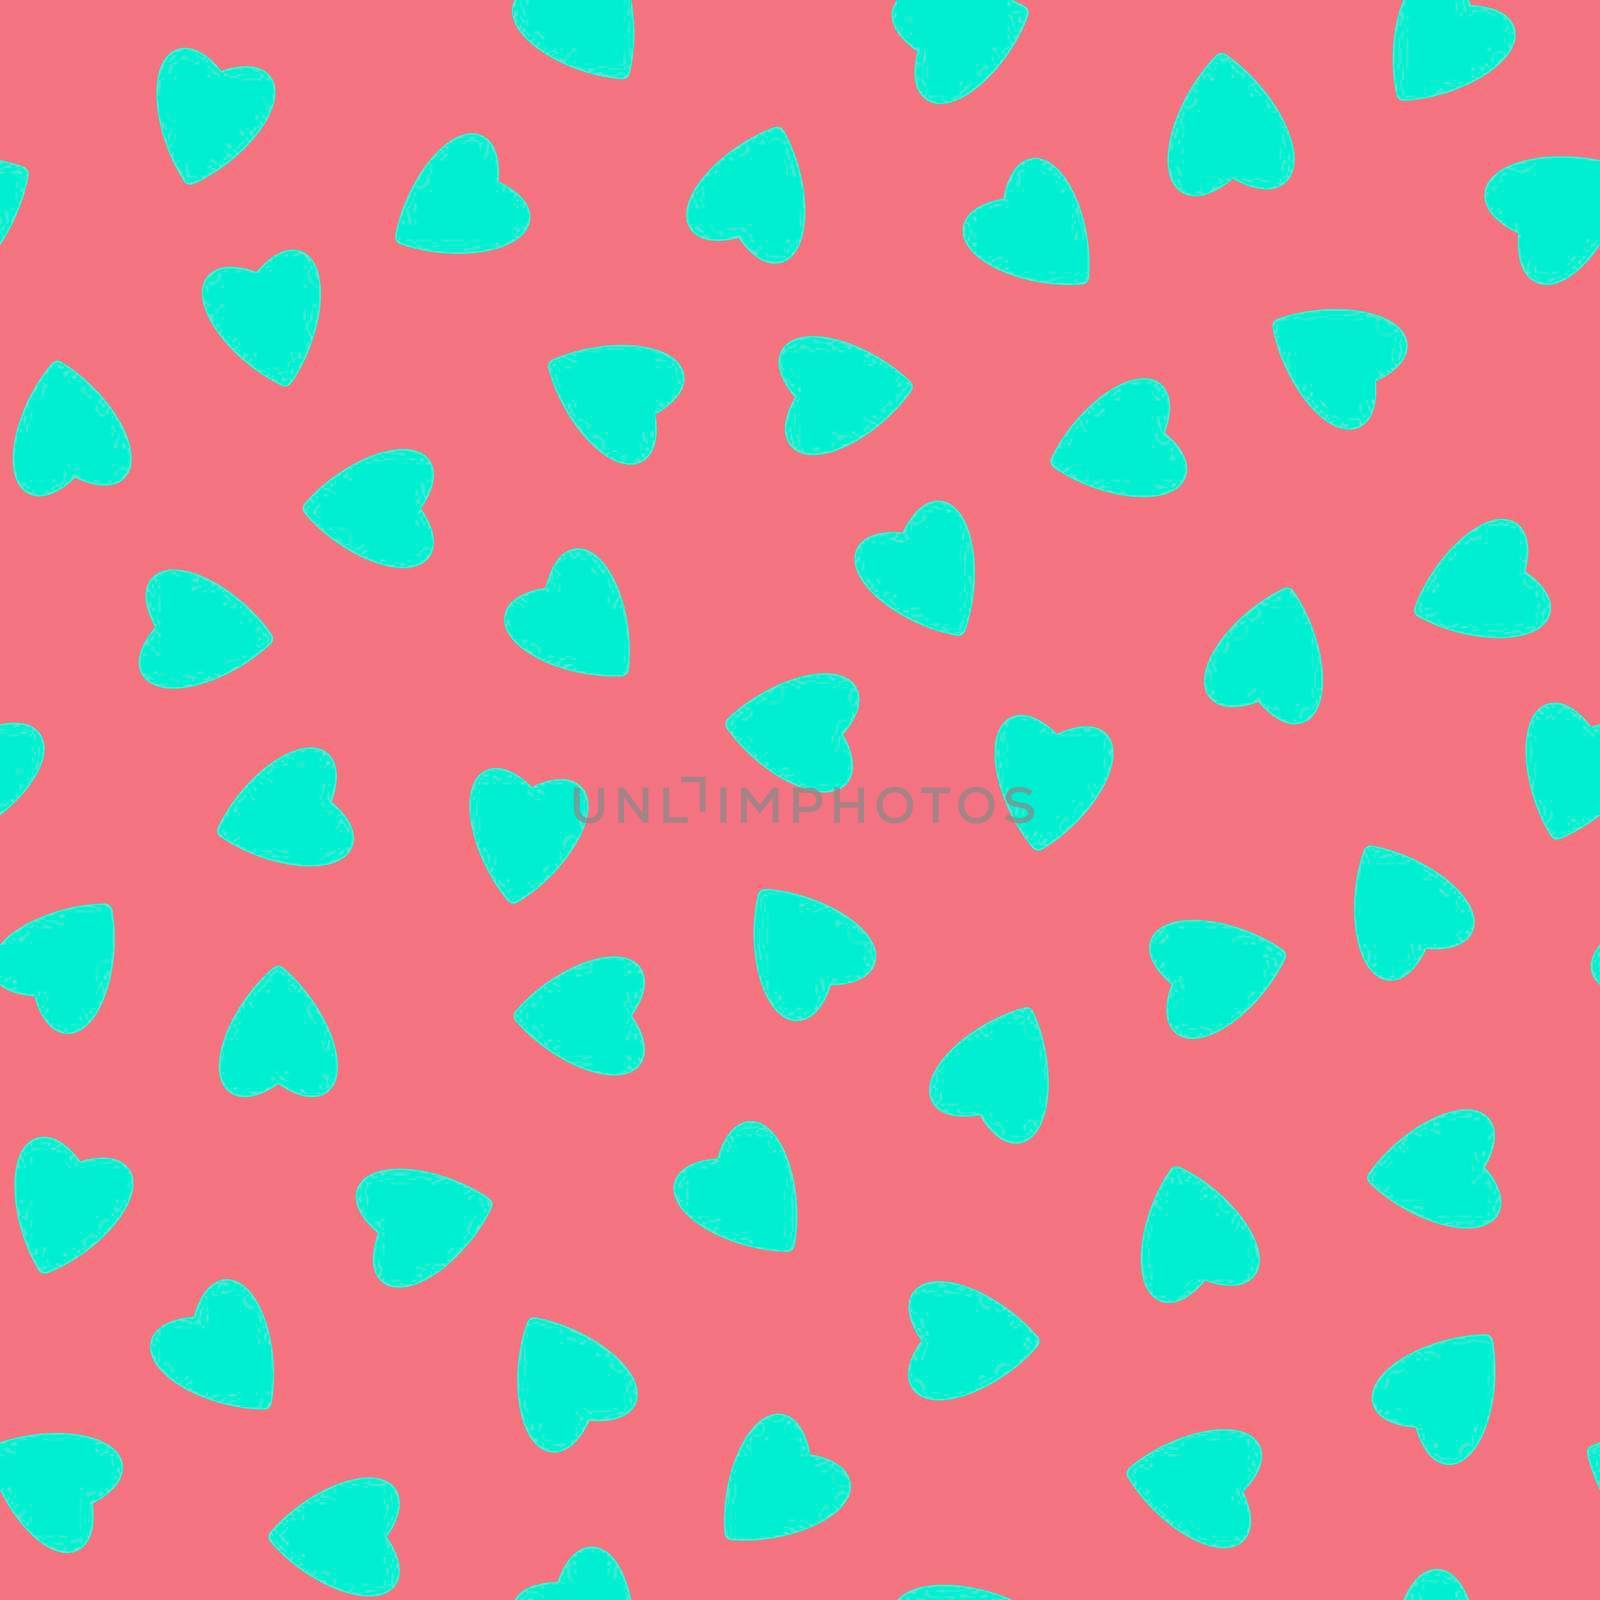 Simple hearts seamless pattern,endless chaotic texture made of tiny heart silhouettes.Valentines,mothers day background.Great for Easter,wedding,scrapbook,gift wrapping paper,textiles.Azure on pink by Angelsmoon